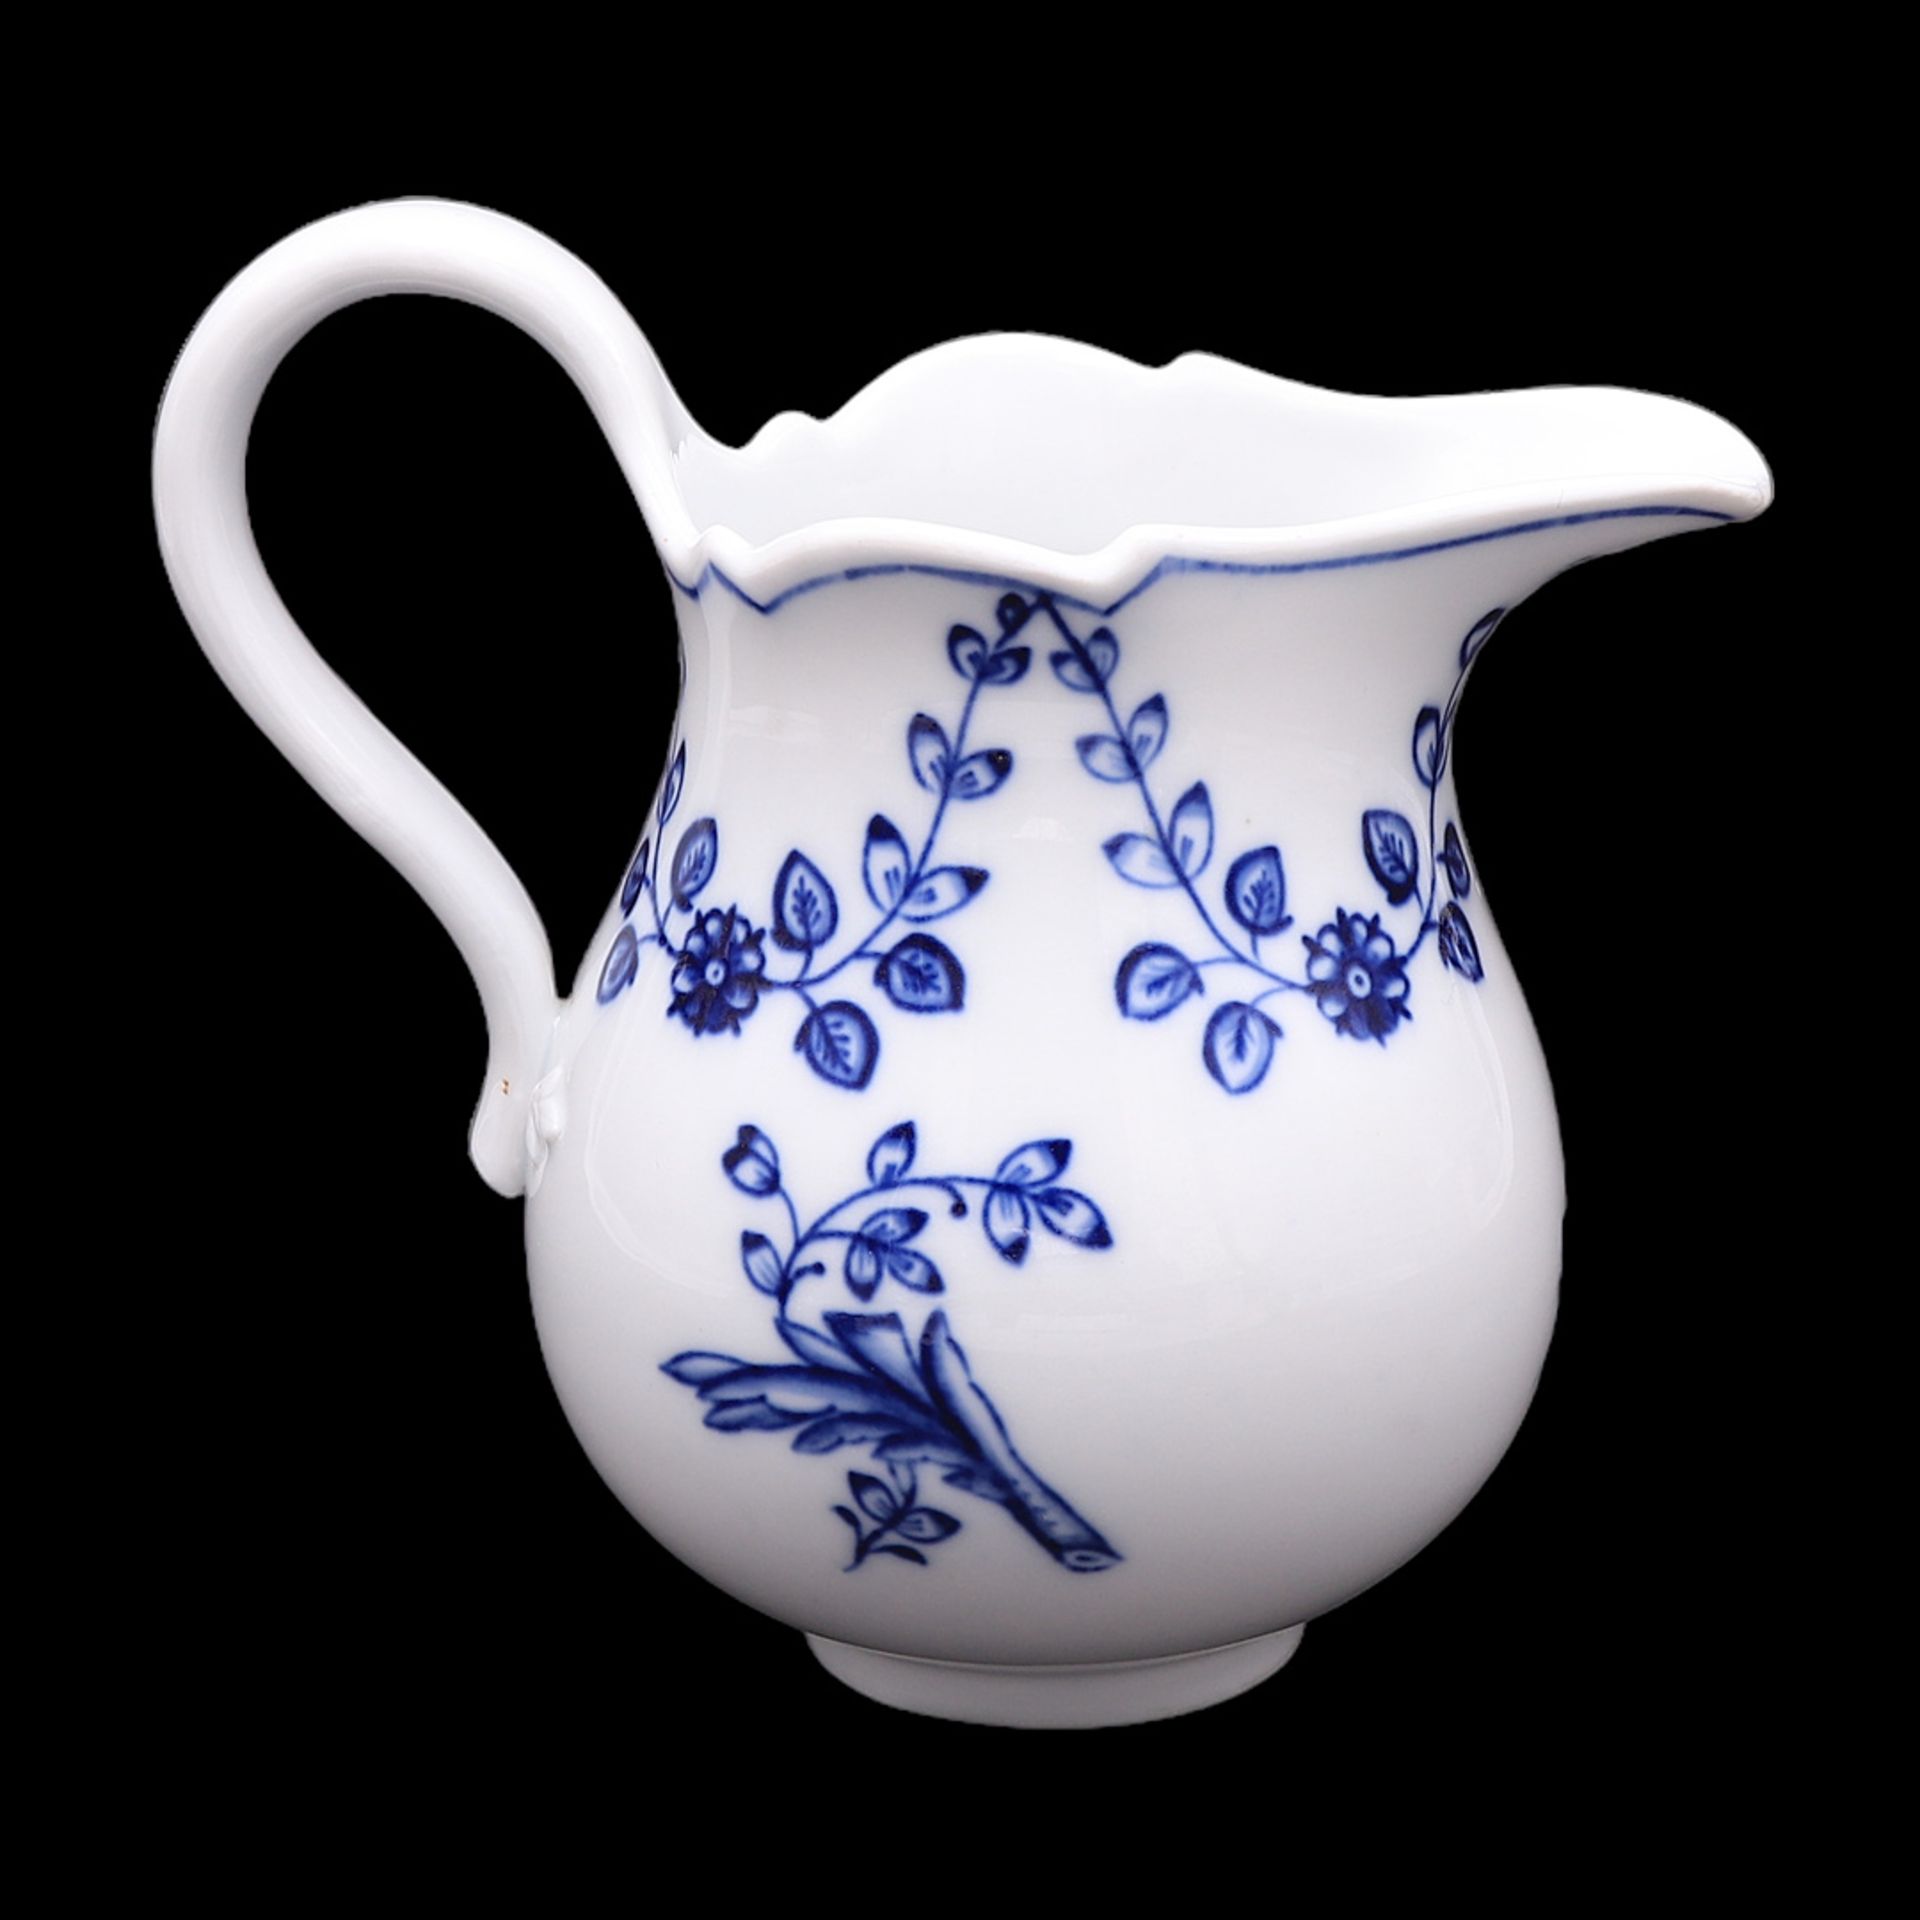 Meissen cream jug with flower painting - Image 3 of 3